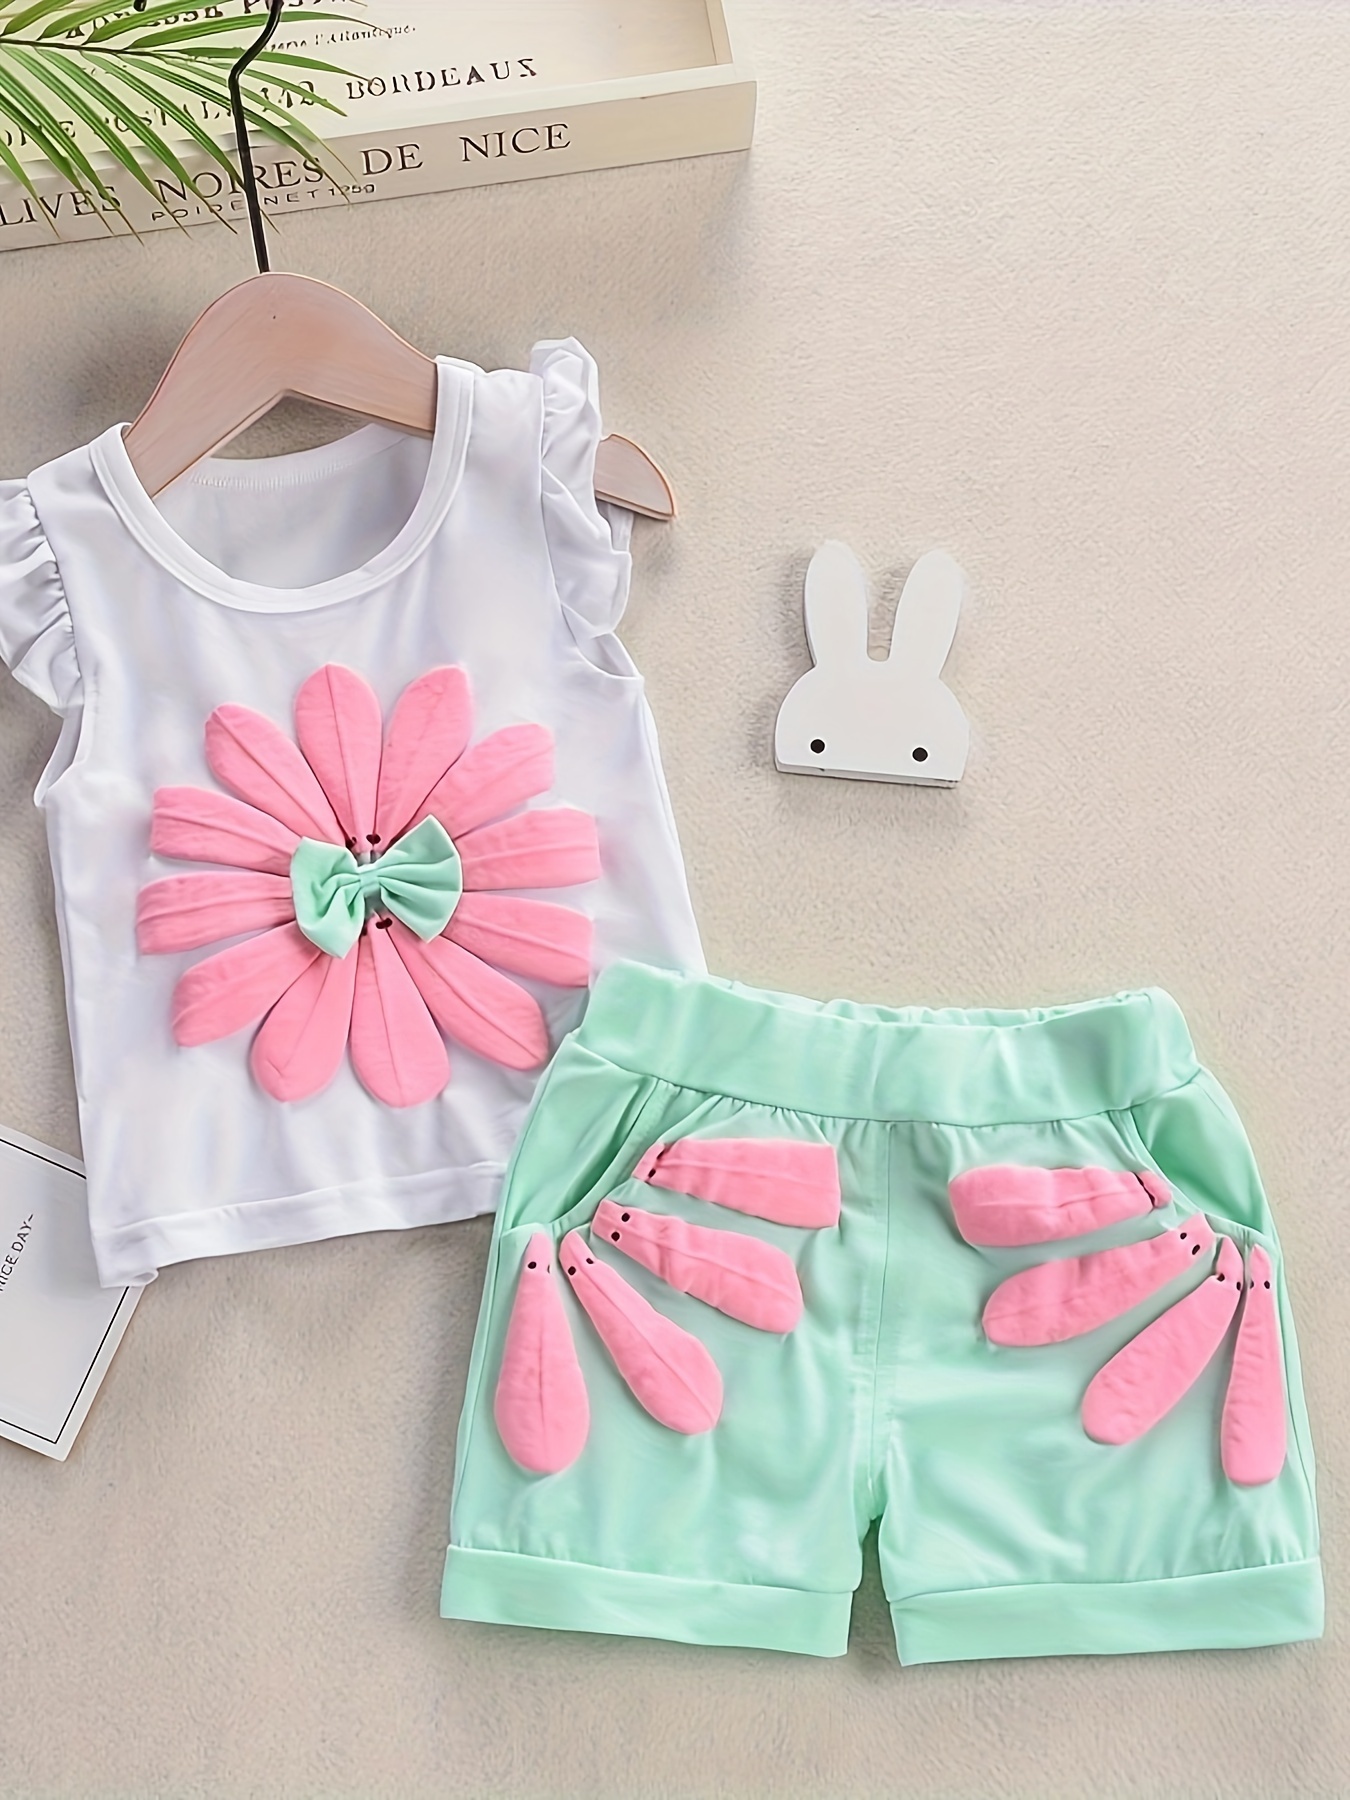 Fashion Baby Girls Summer Clothing Set Flamingo Design Tank Tops With  Ruffle Shorts @ Best Price Online